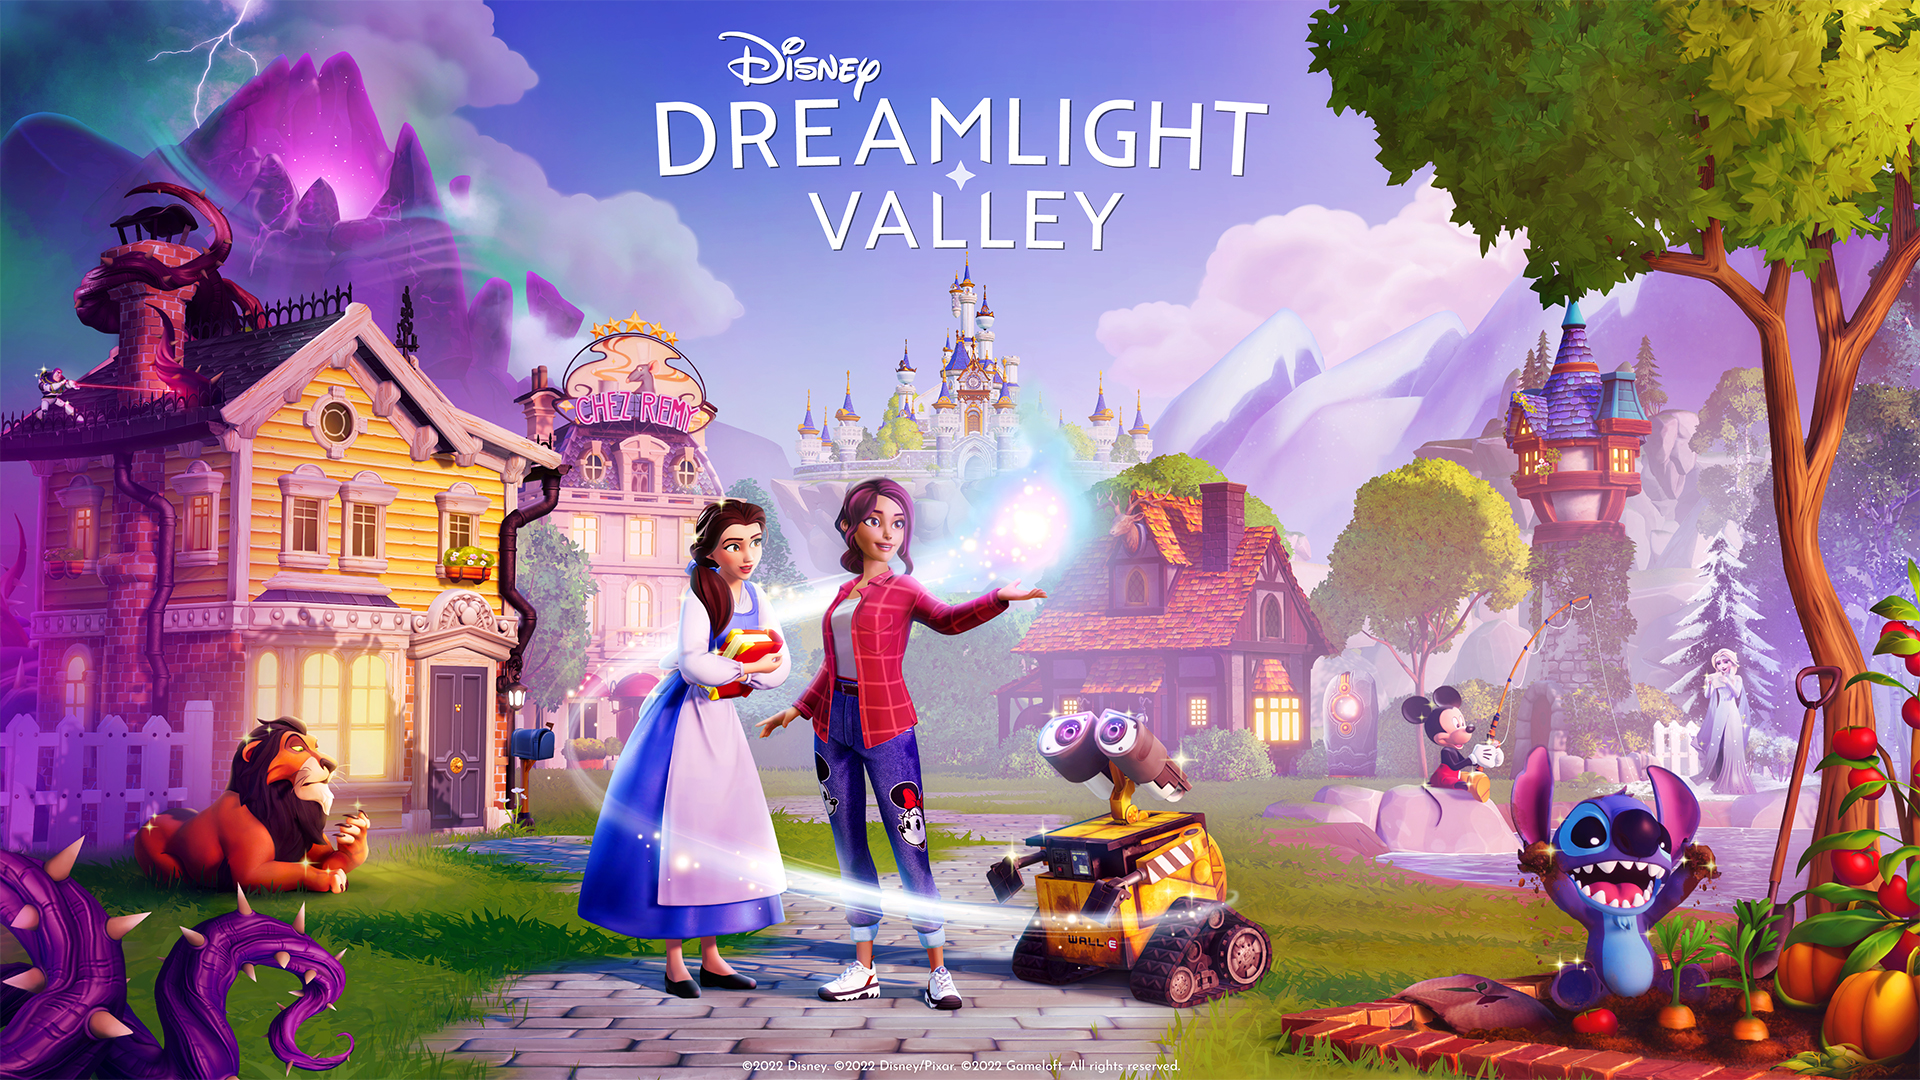 Disney Dreamlight Valley hitting early access this September